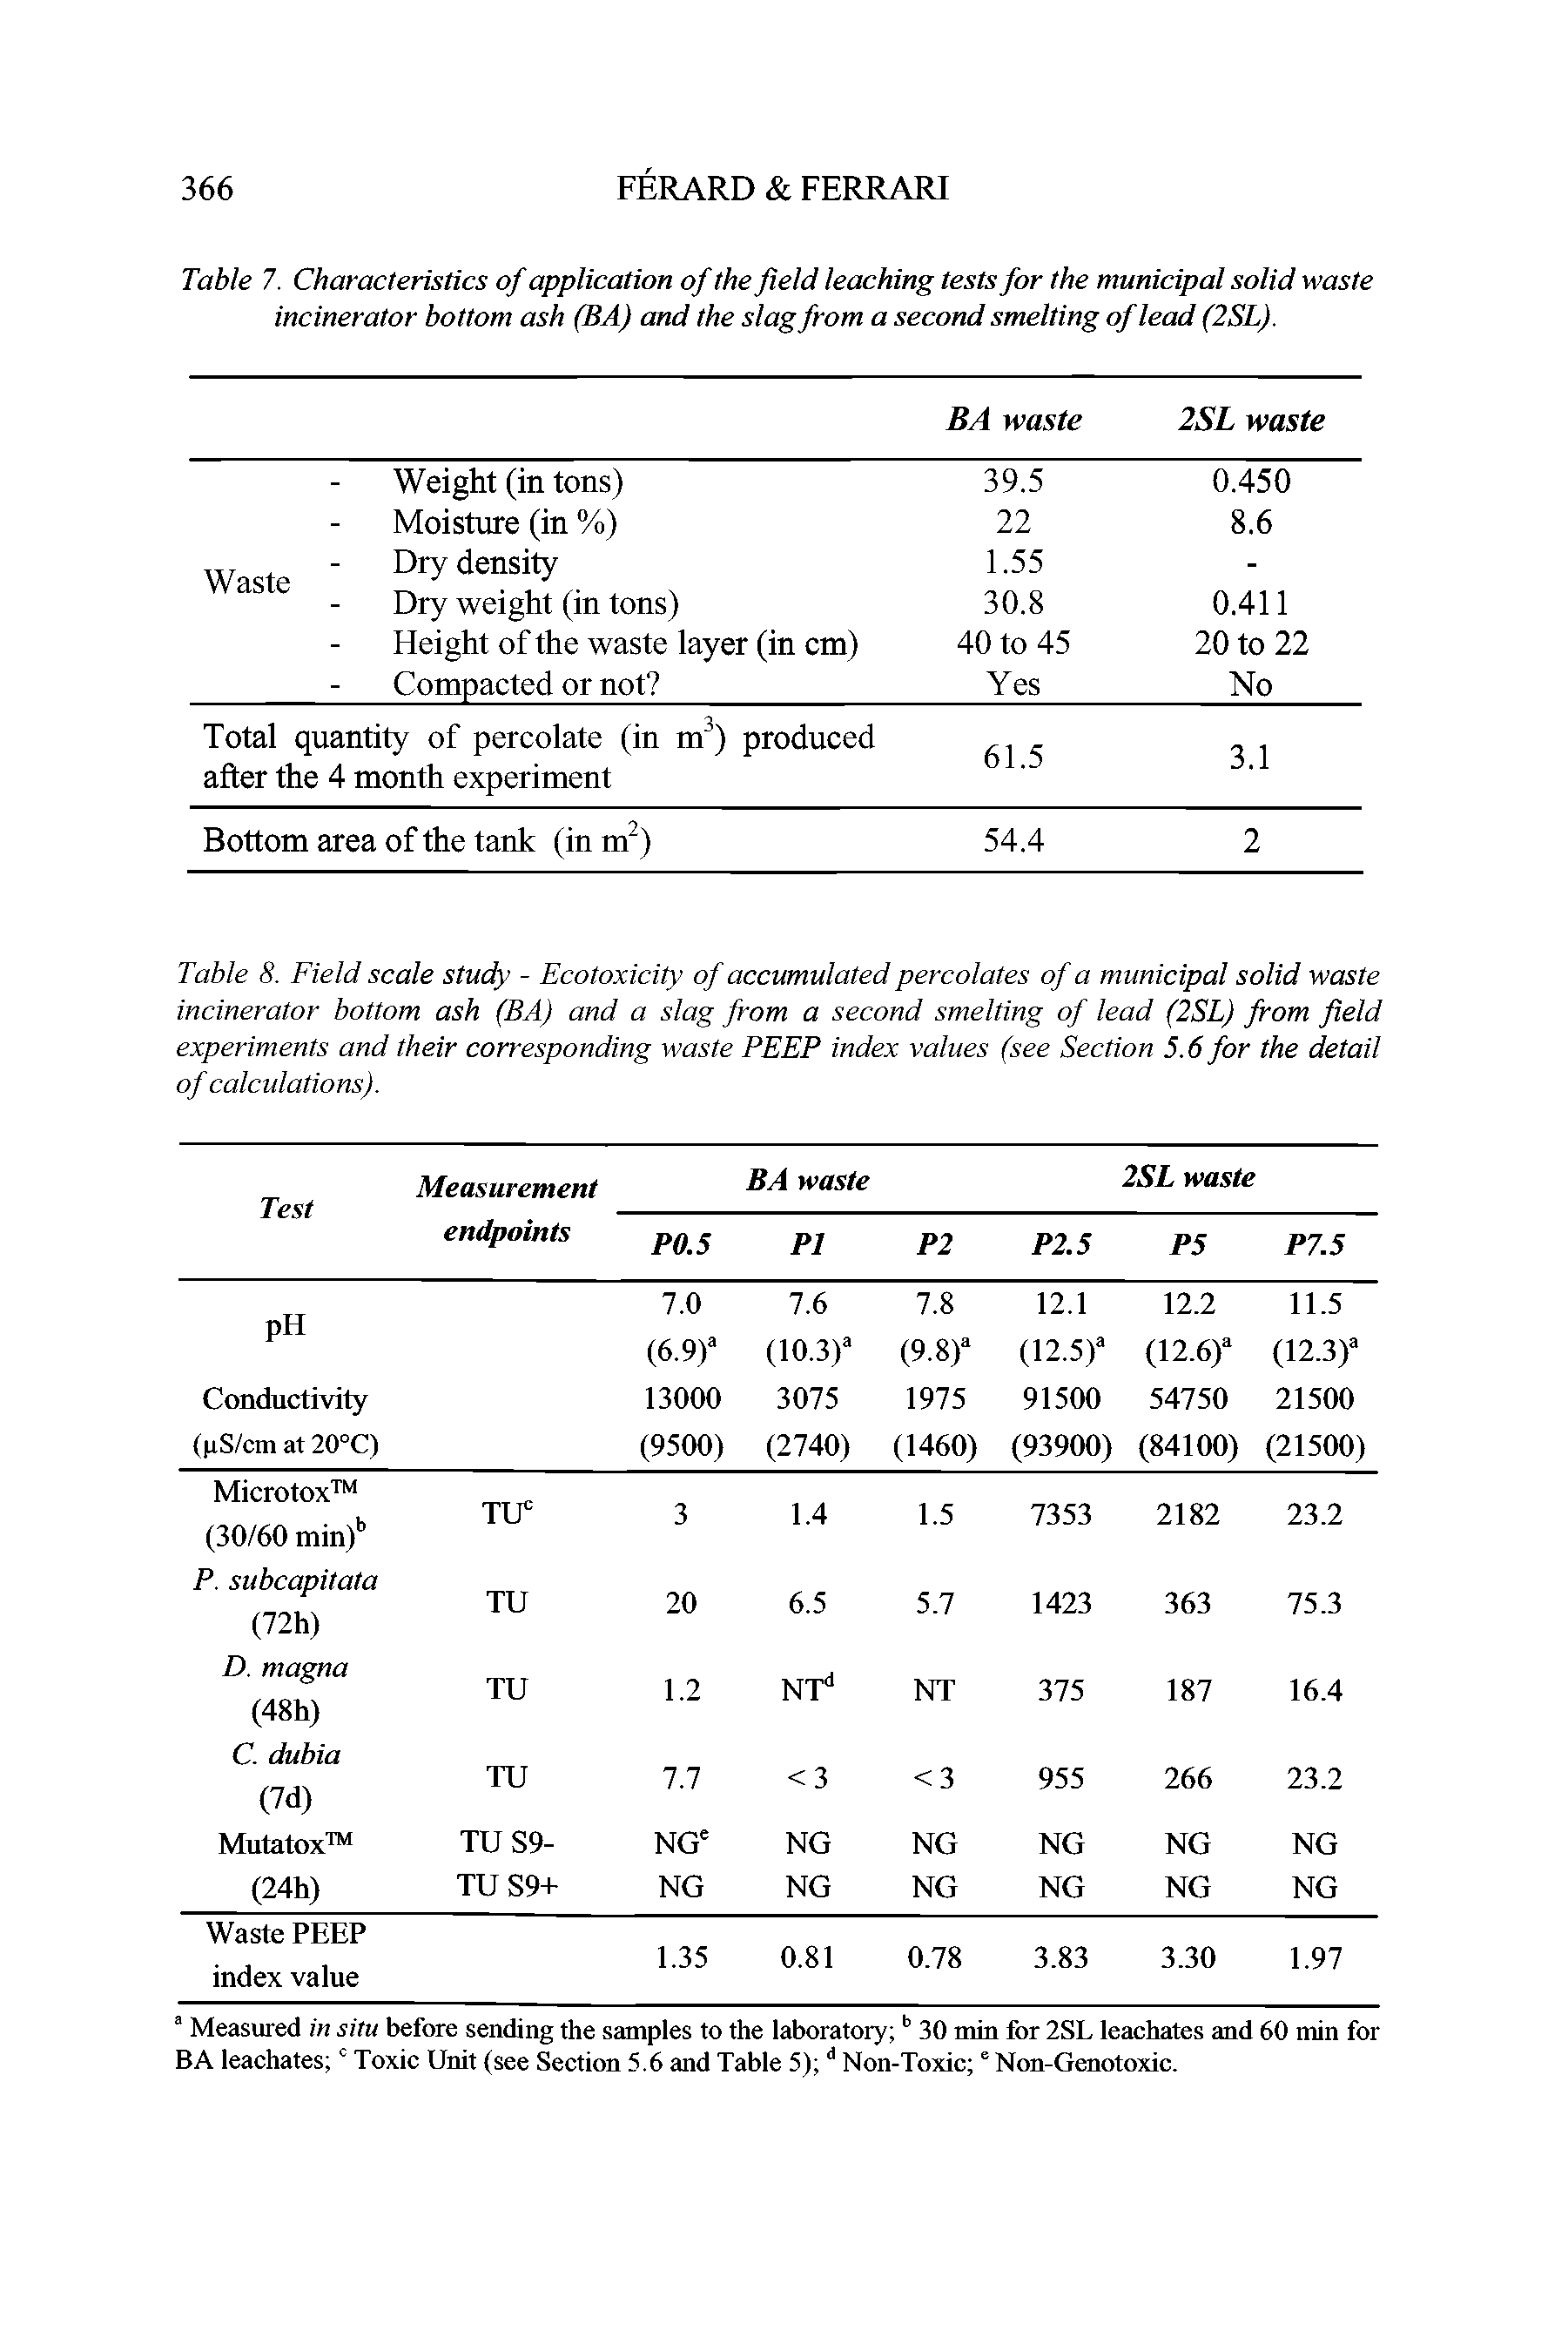 Table 8. Field scale study - Ecotoxicity of accumulated percolates of a municipal solid waste incinerator bottom ash (BA) and a slag from a second smelting of lead (2SL) from field experiments and their corresponding waste PEEP index values (see Section 5.6 for the detail of calculations).